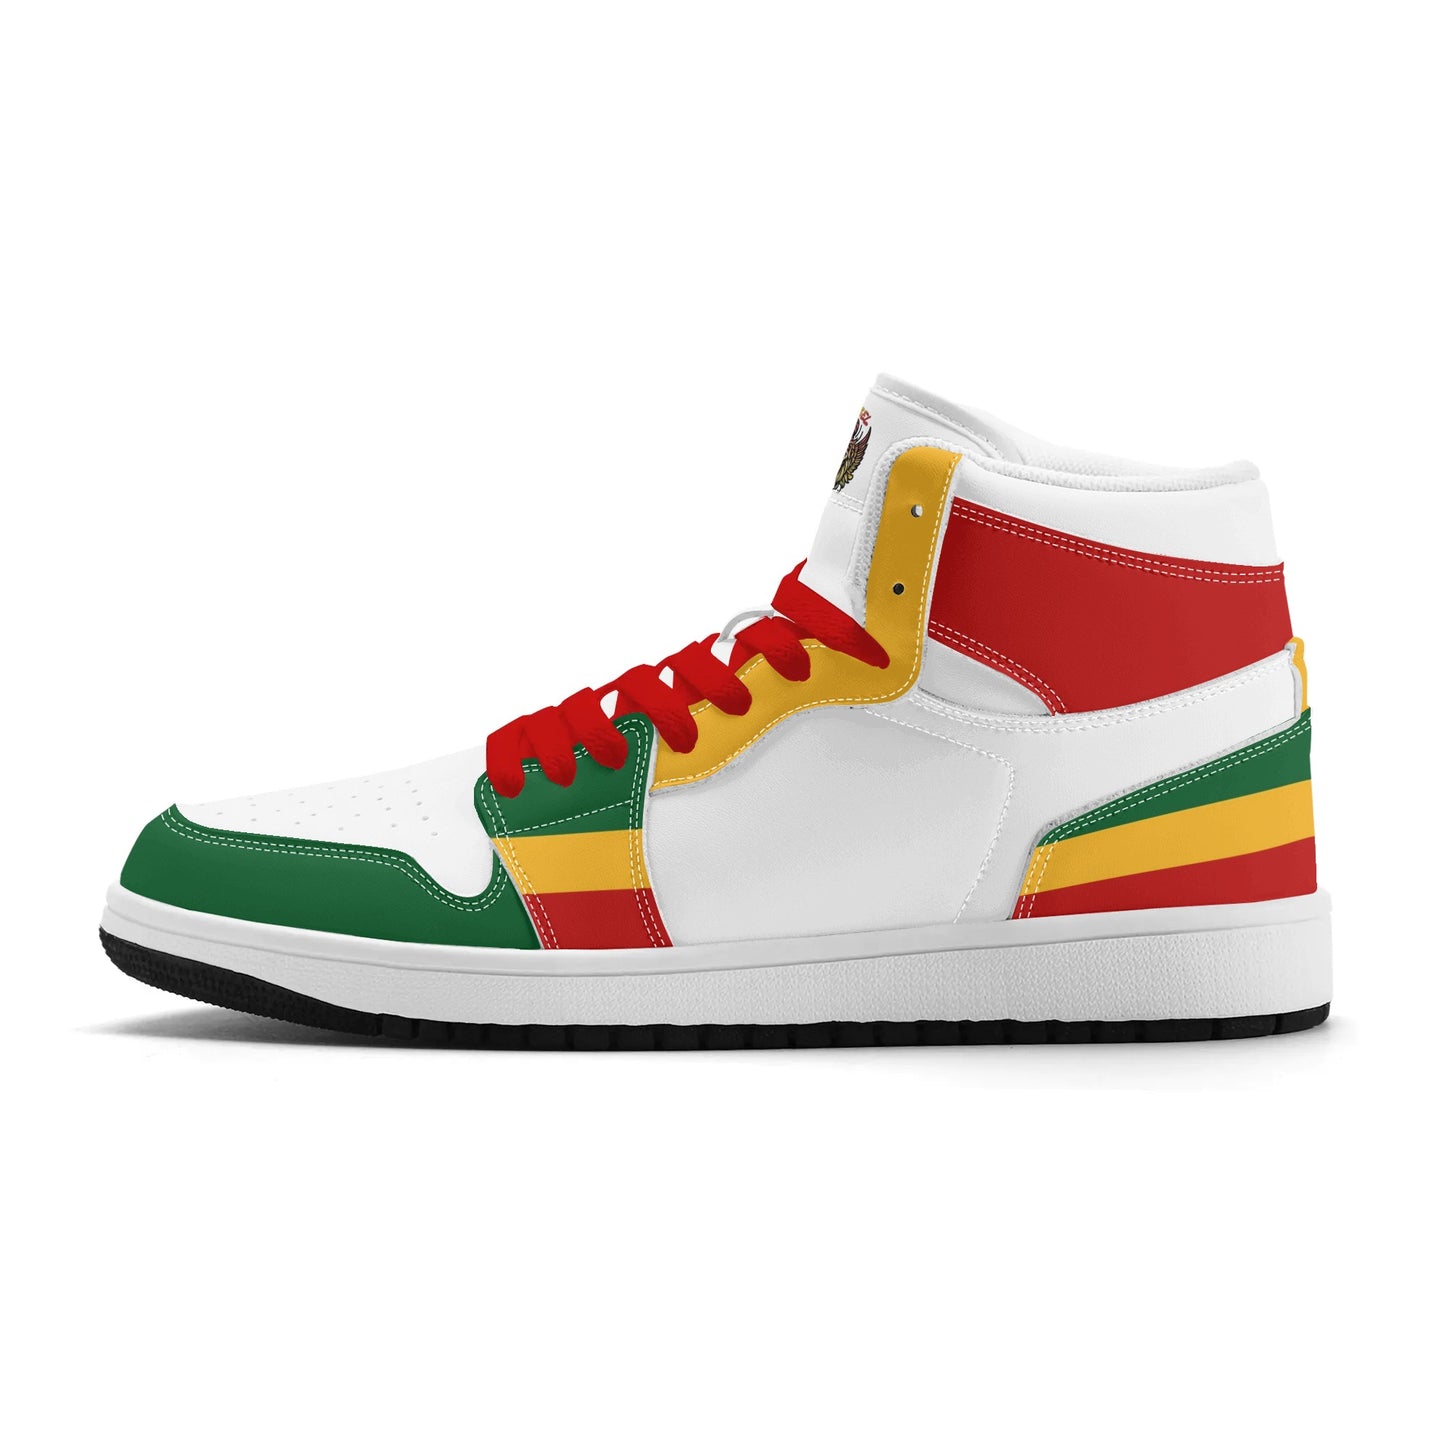 Rasta Colors Shoes For Sale For Men and Women, Rasta Colors Low Tops, Jamaica Colors Sneakers, Red Green Yellow Rasta Stripes Shoes on a white background as a product image.